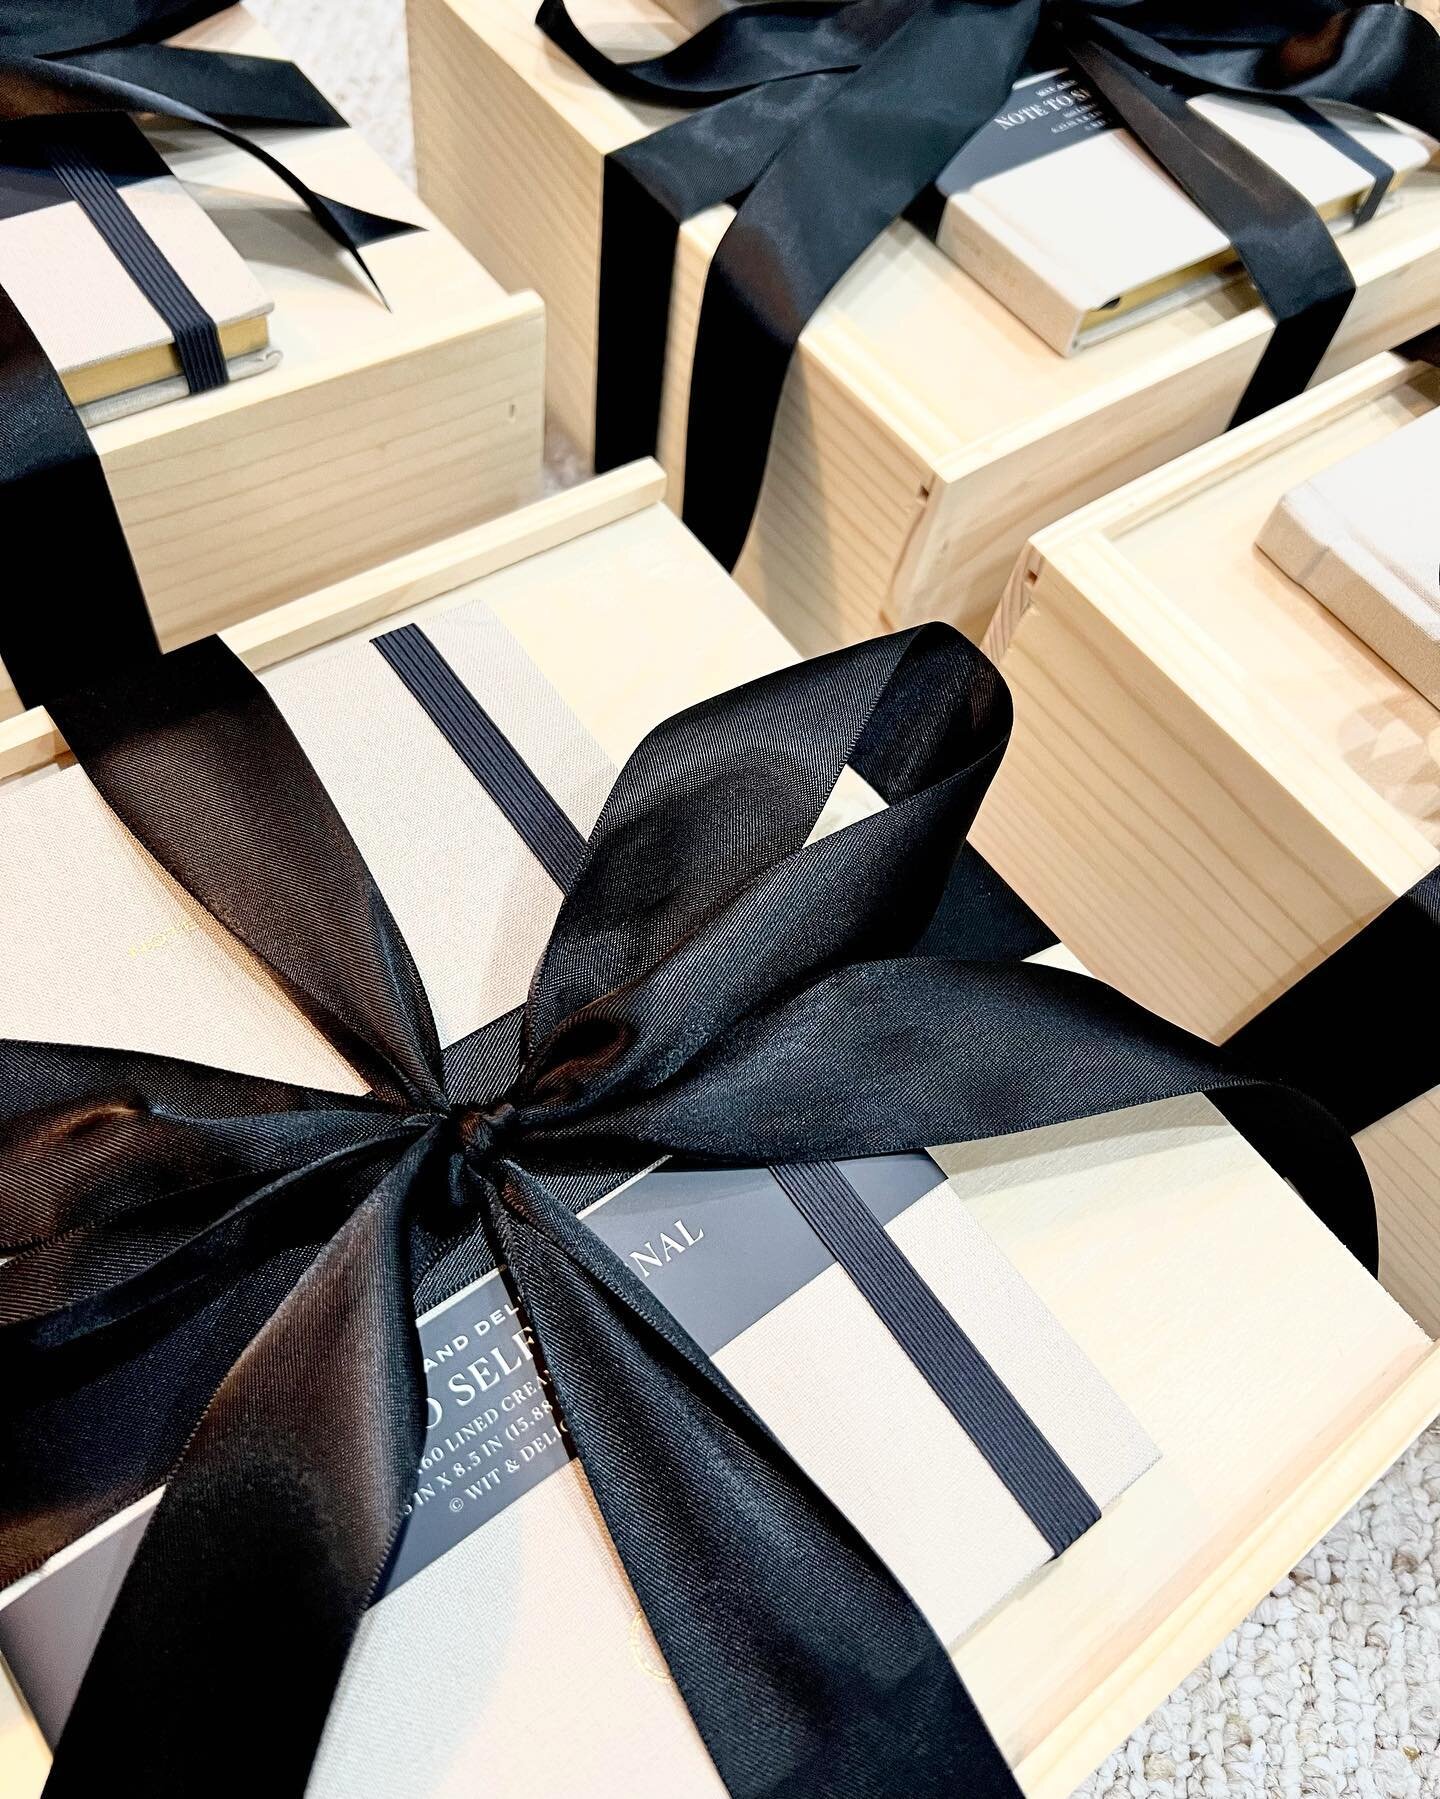 Custom wooden boxes and satin ribbon for an up-leveled experience. So. Pretty. 🥰